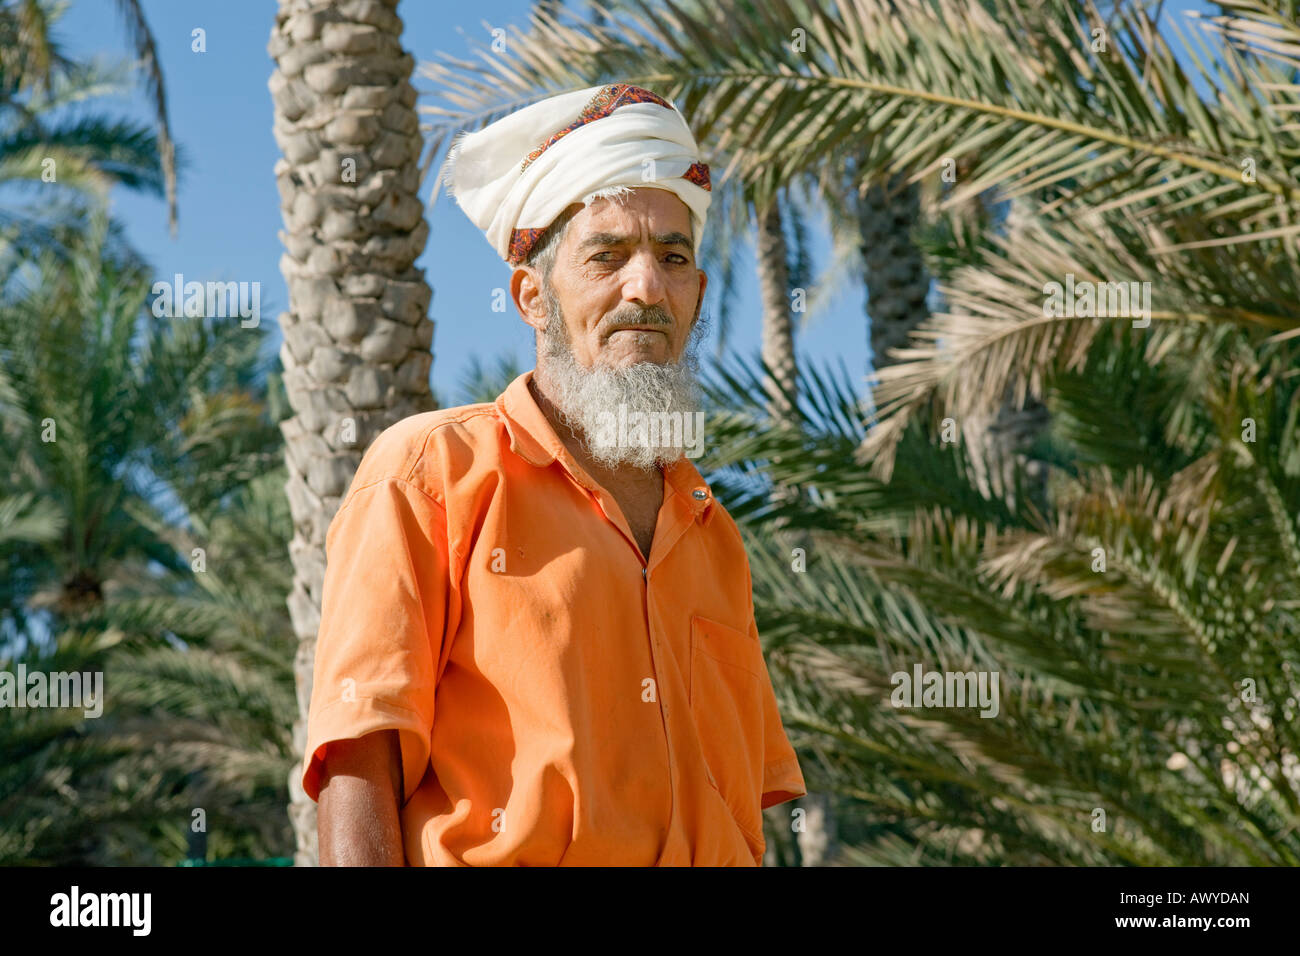 Village of Nakhl, Oman: Portrait of a bearded man wearing a white turban and orange jump suit Stock Photo